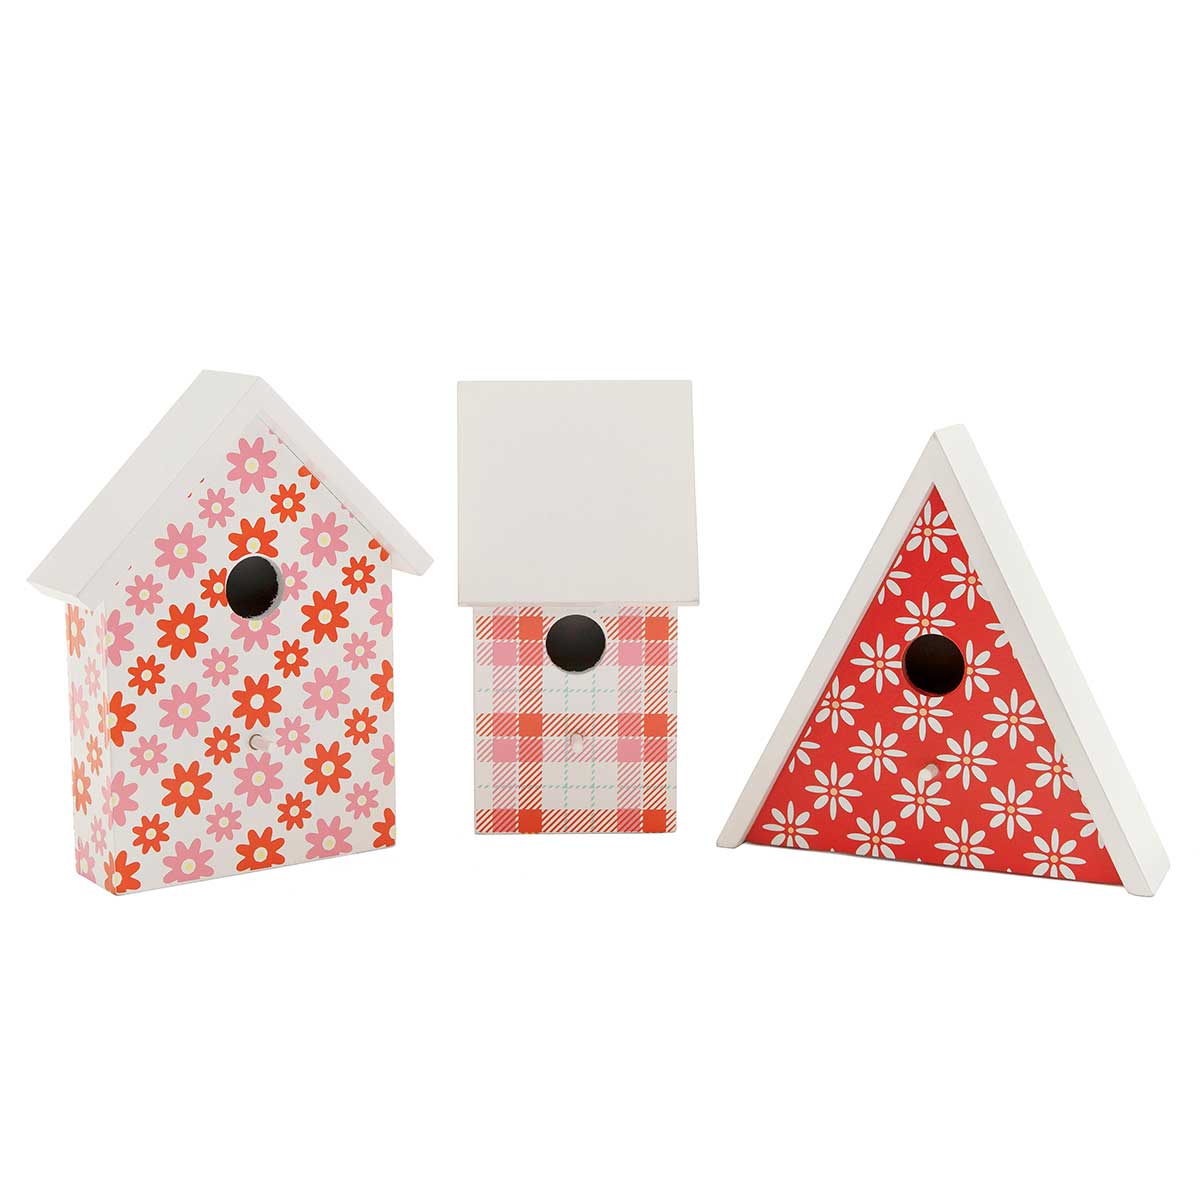 CORAL FAIR A-FRAME WOOD BIRDHOUSE SIT-A-BOUT CORAL/WHITE